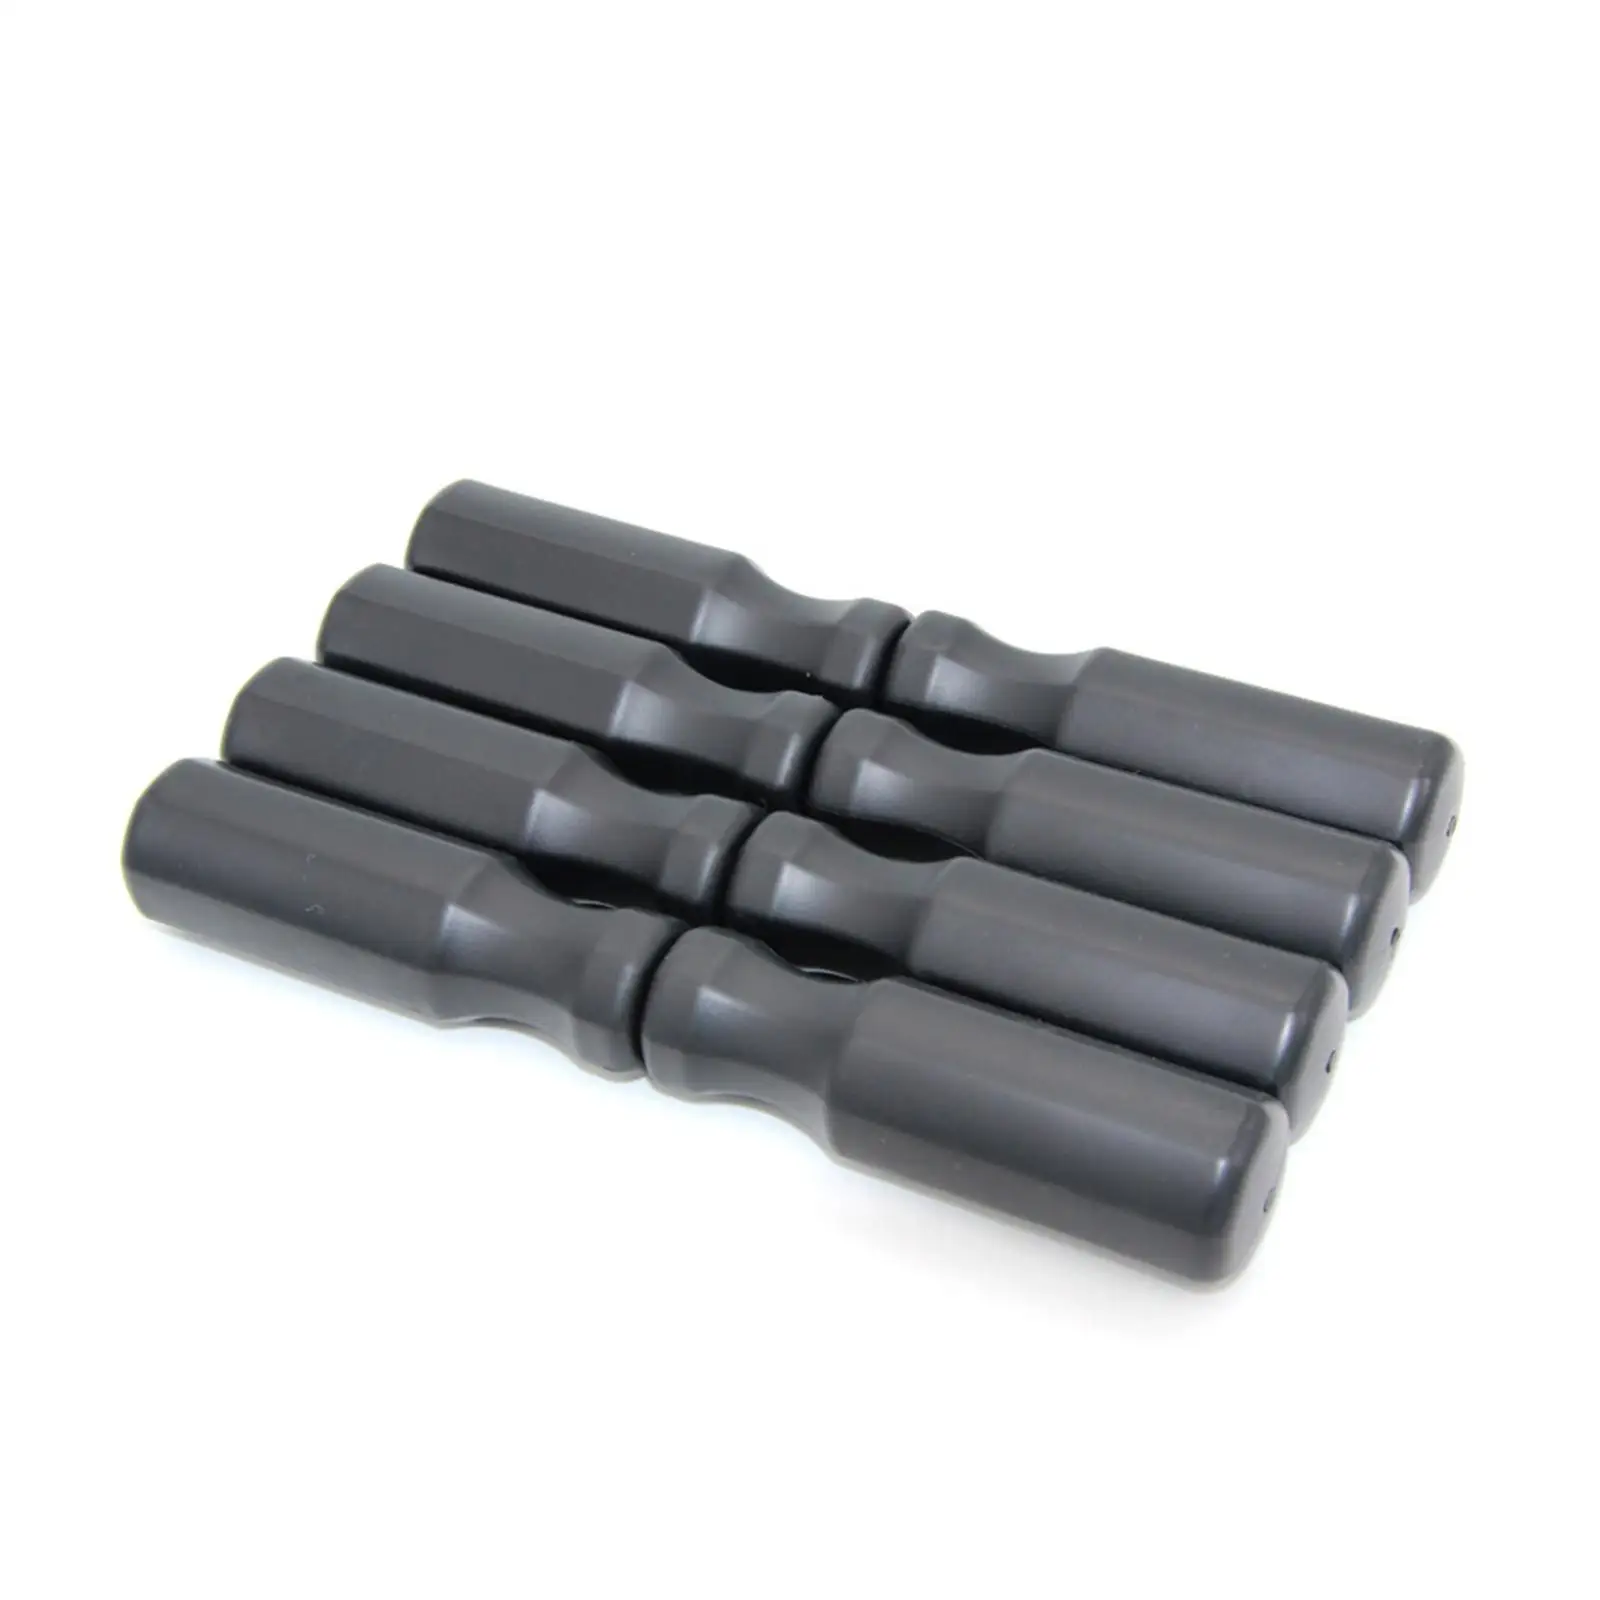 8x Foosball Handle Grip Lightweight Easy Using Rod Replacement Handles for